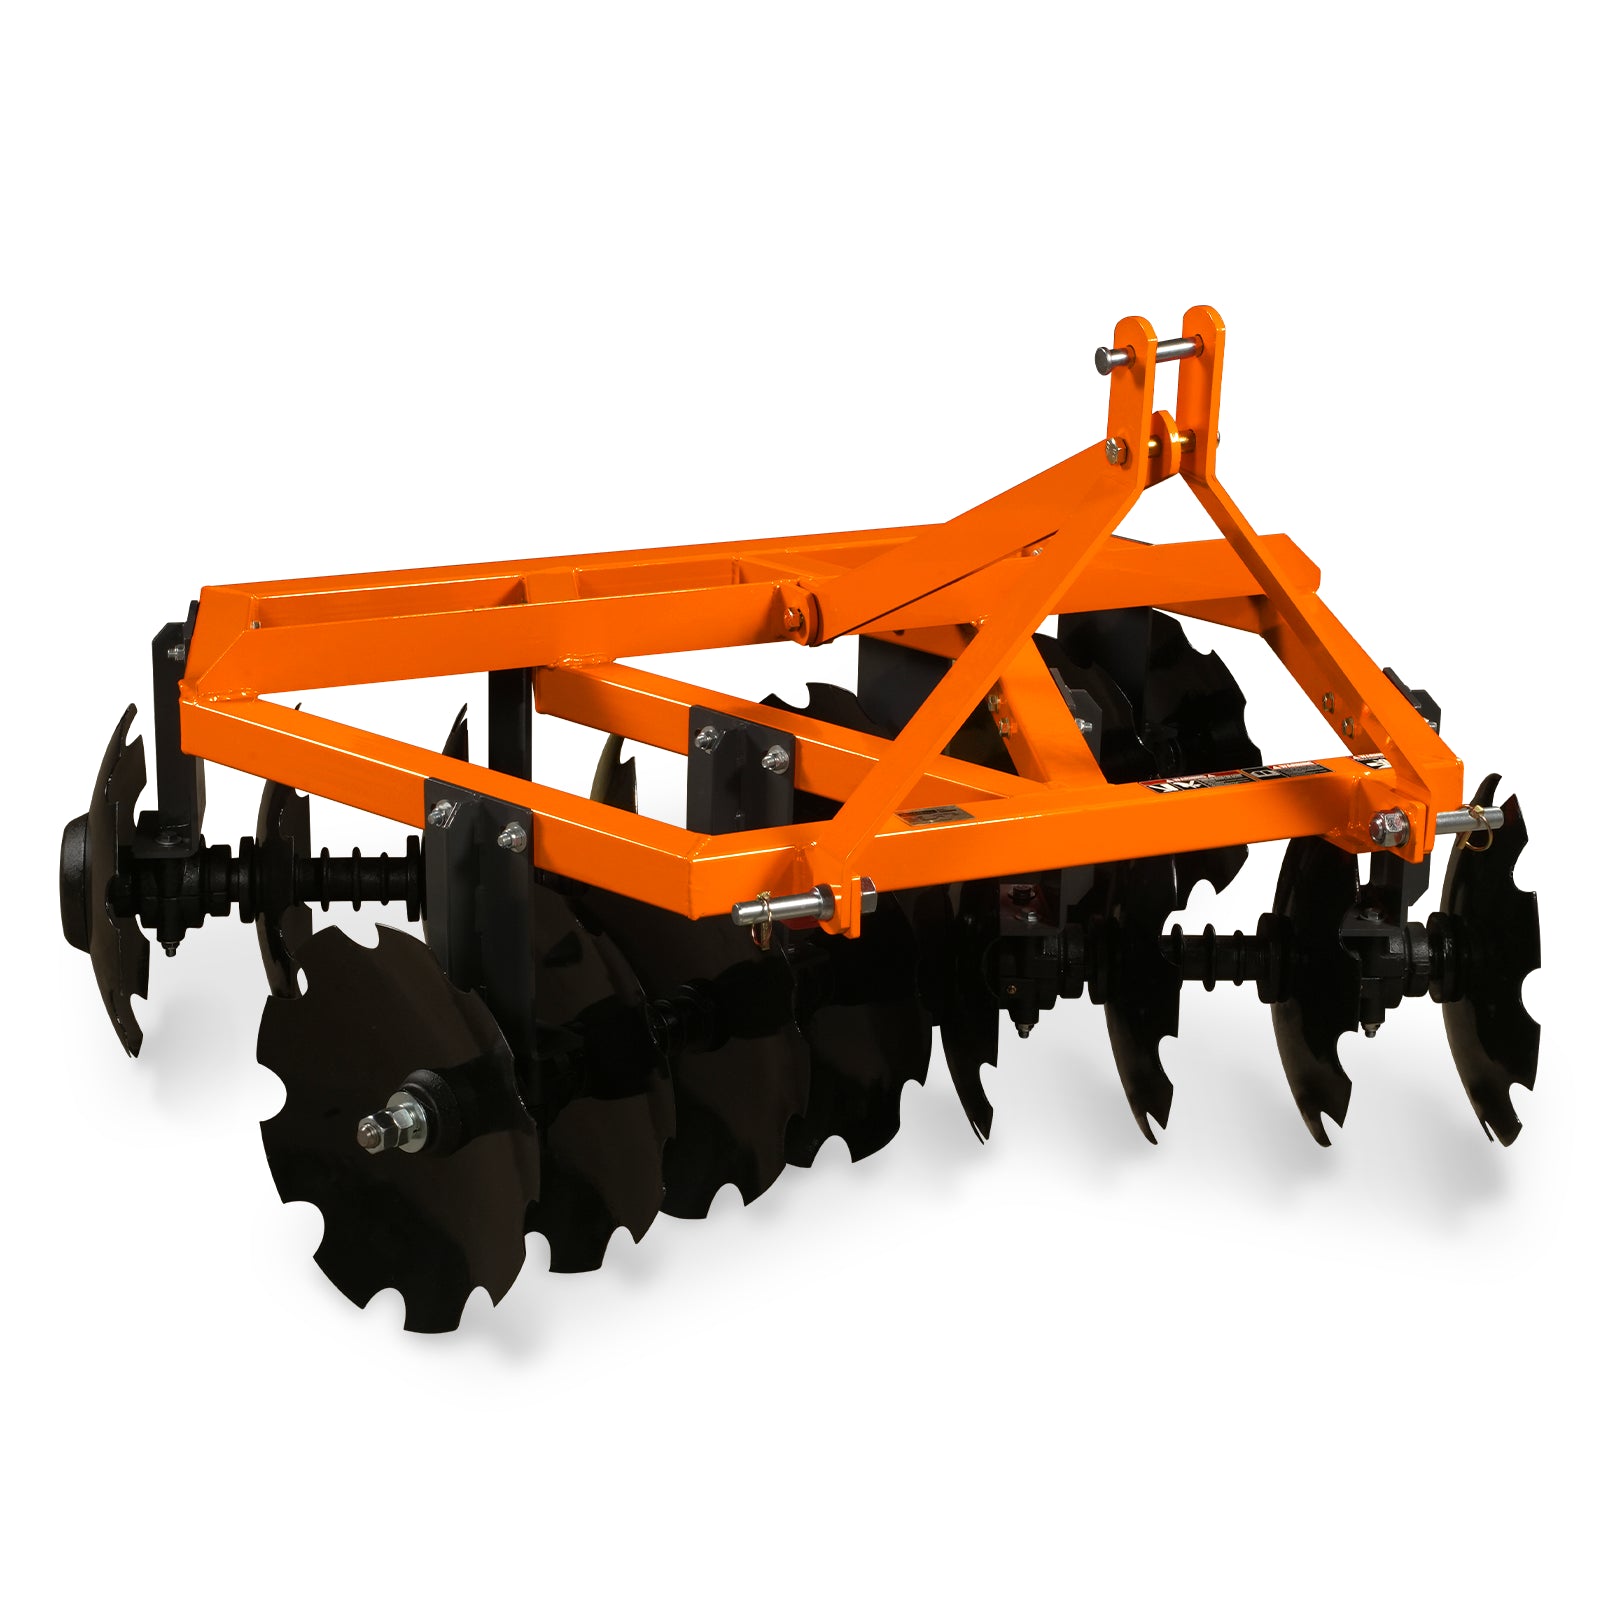 60" Tractor Notched Disc Harrow Disc Plow 3 Point Hitch